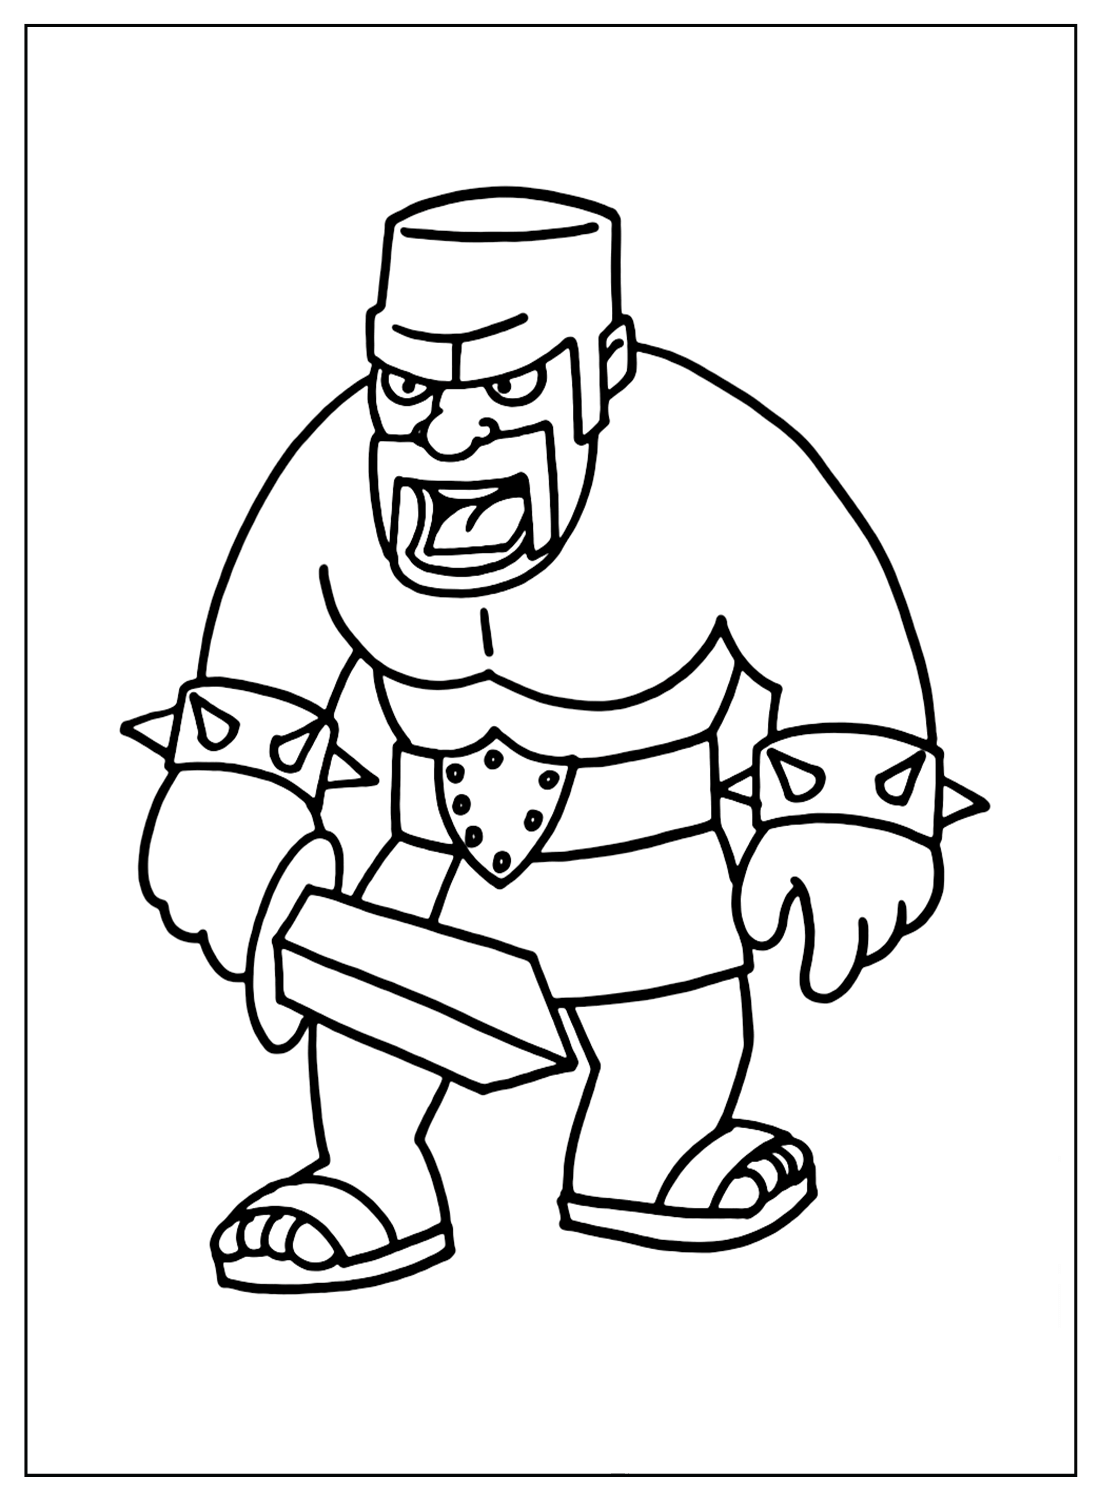 Clash of Clans Barbarian Coloring Pages from Clash of Clans